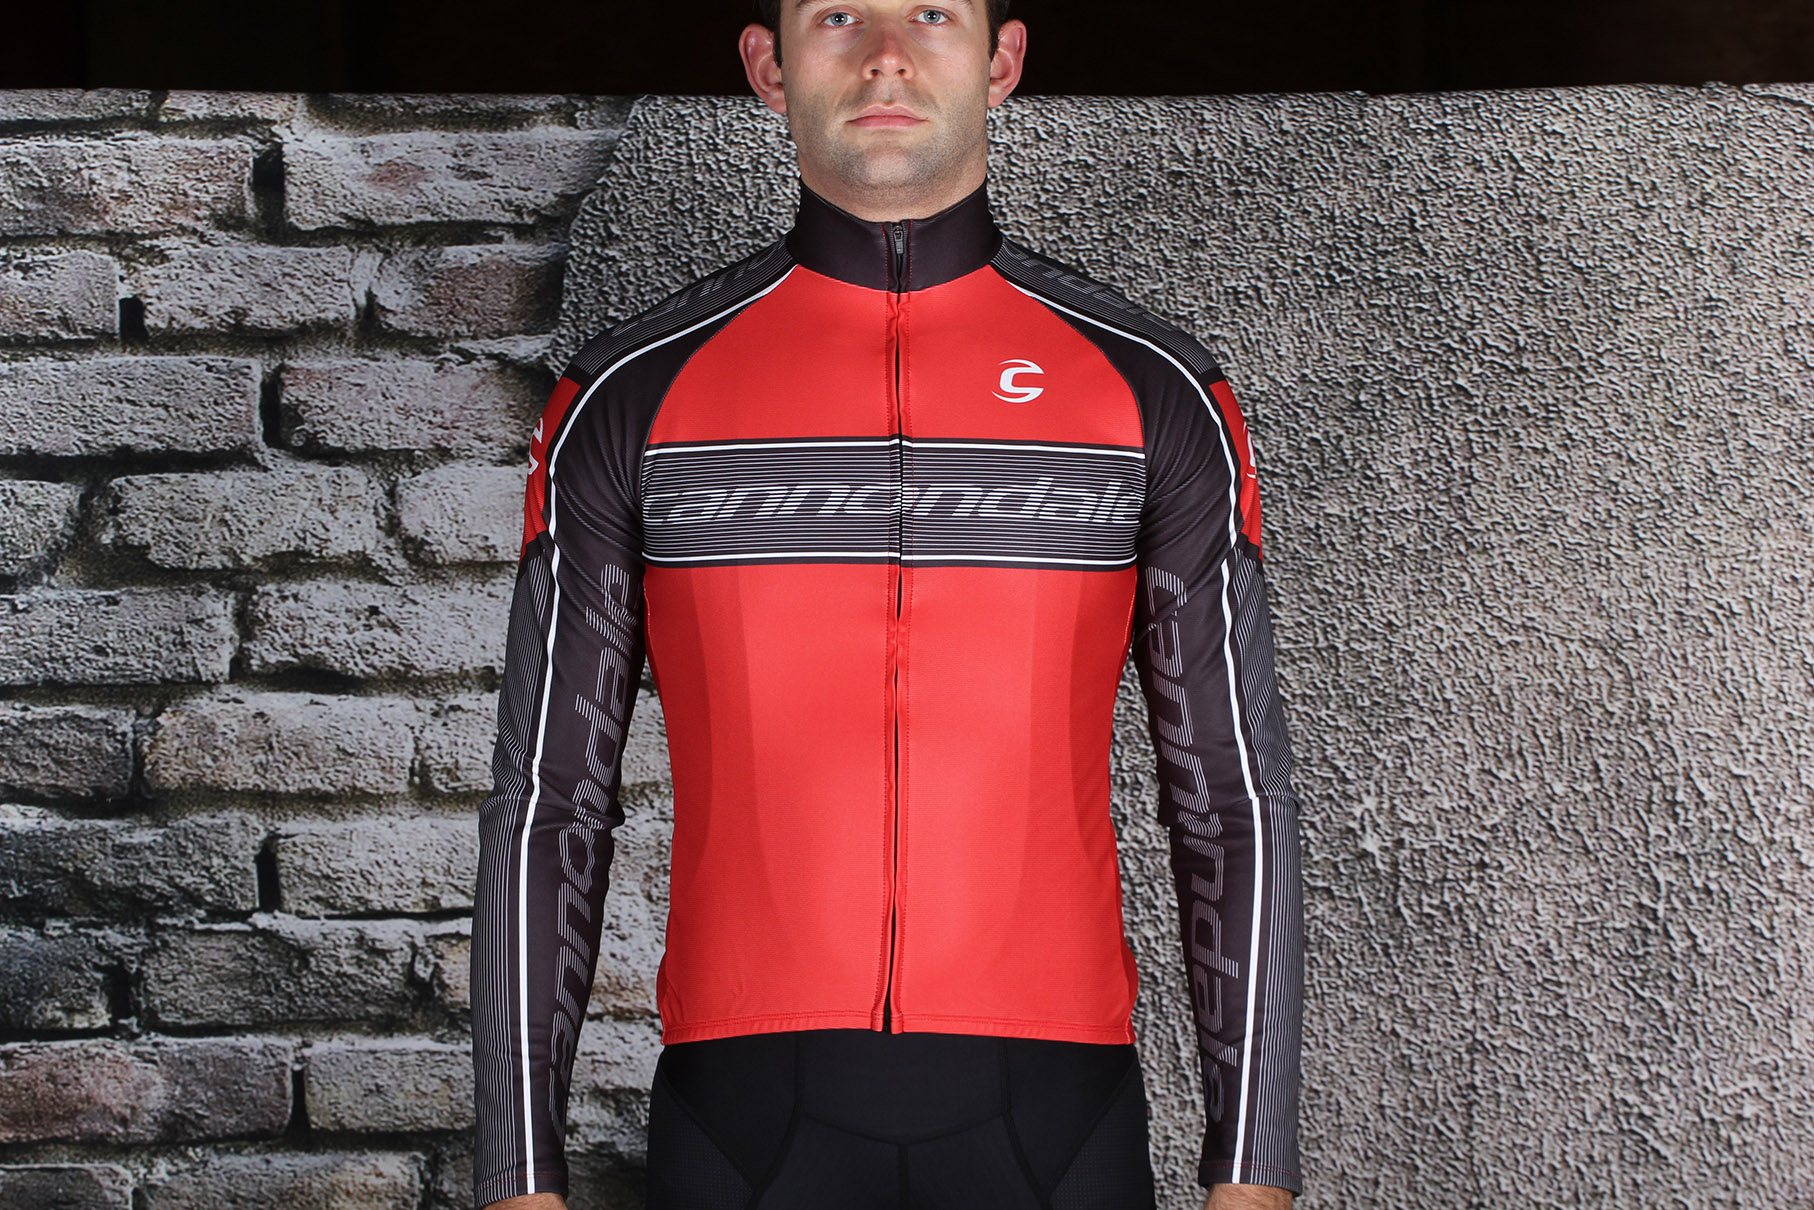 cannondale long sleeve jersey